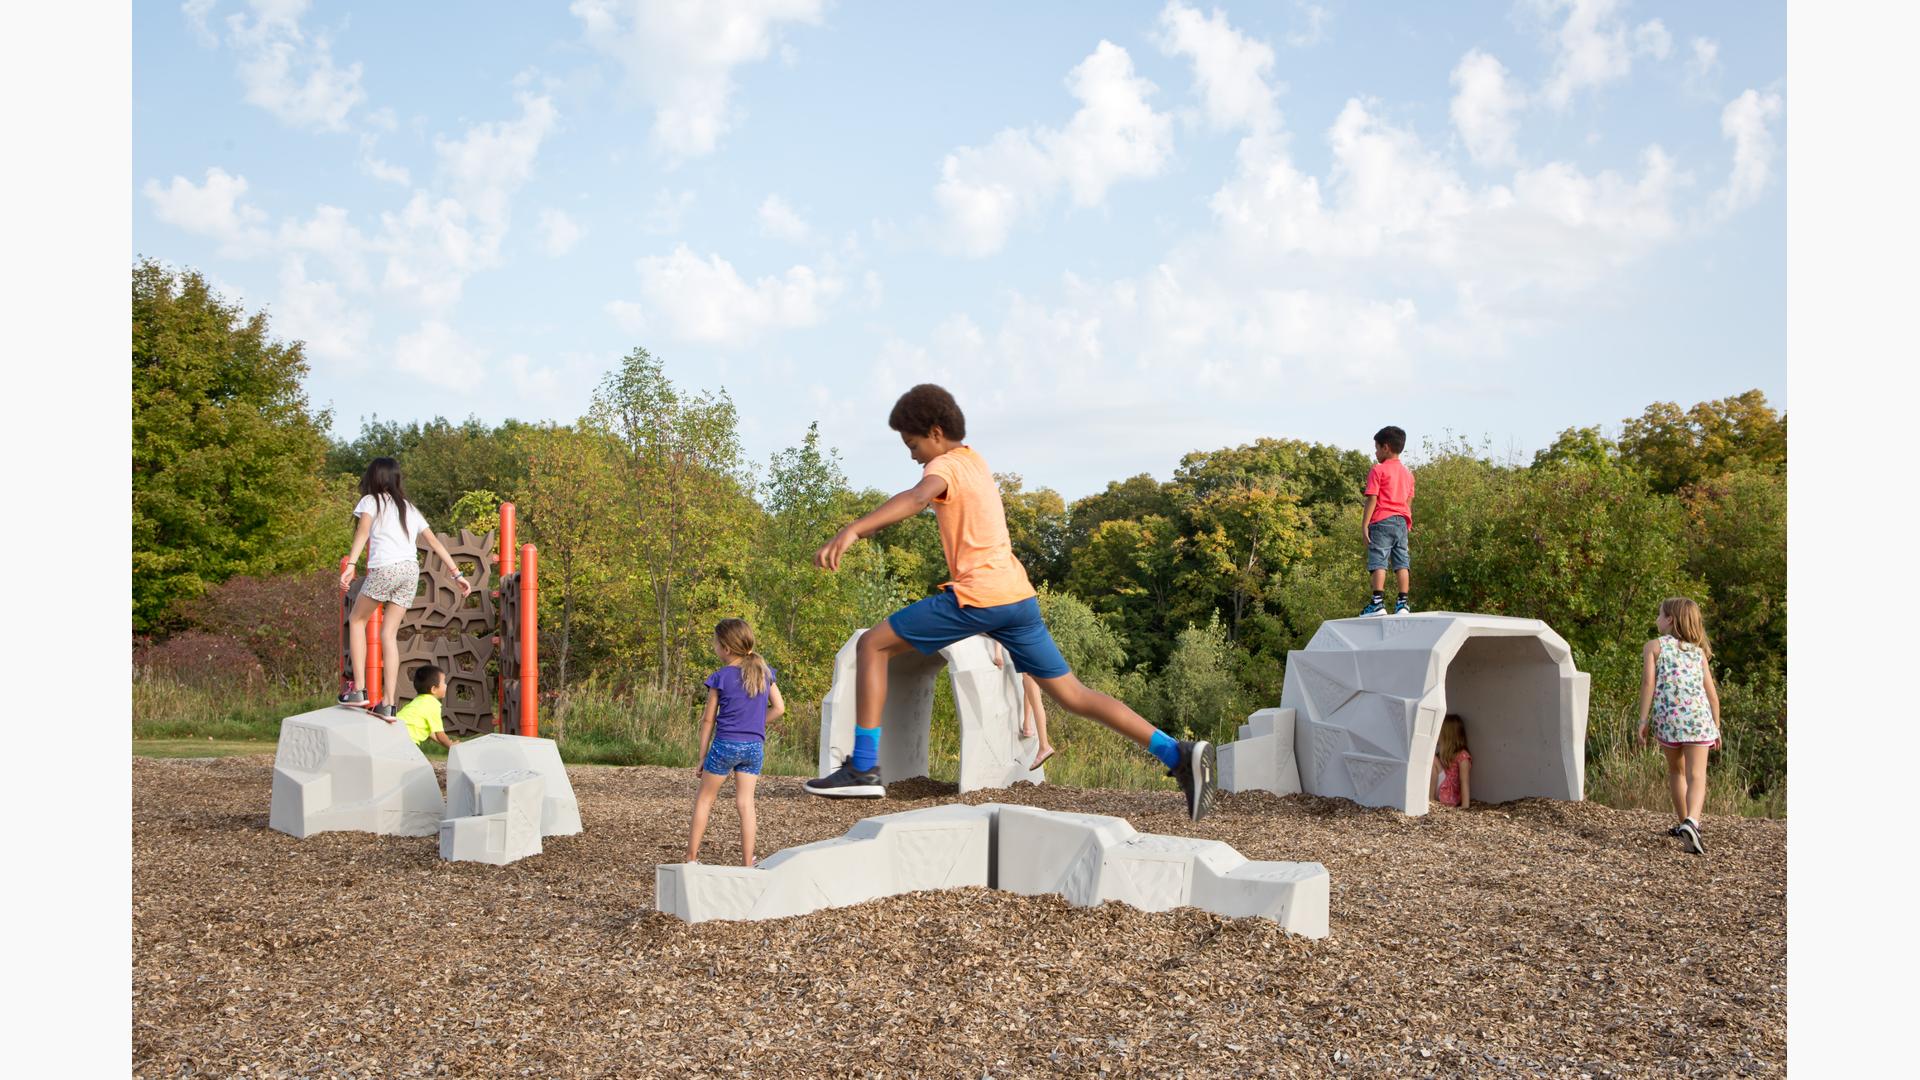 Boy in orange shirt leaps from "rock," while other children stand on "rock formations." A freestanding climber stands in the background.